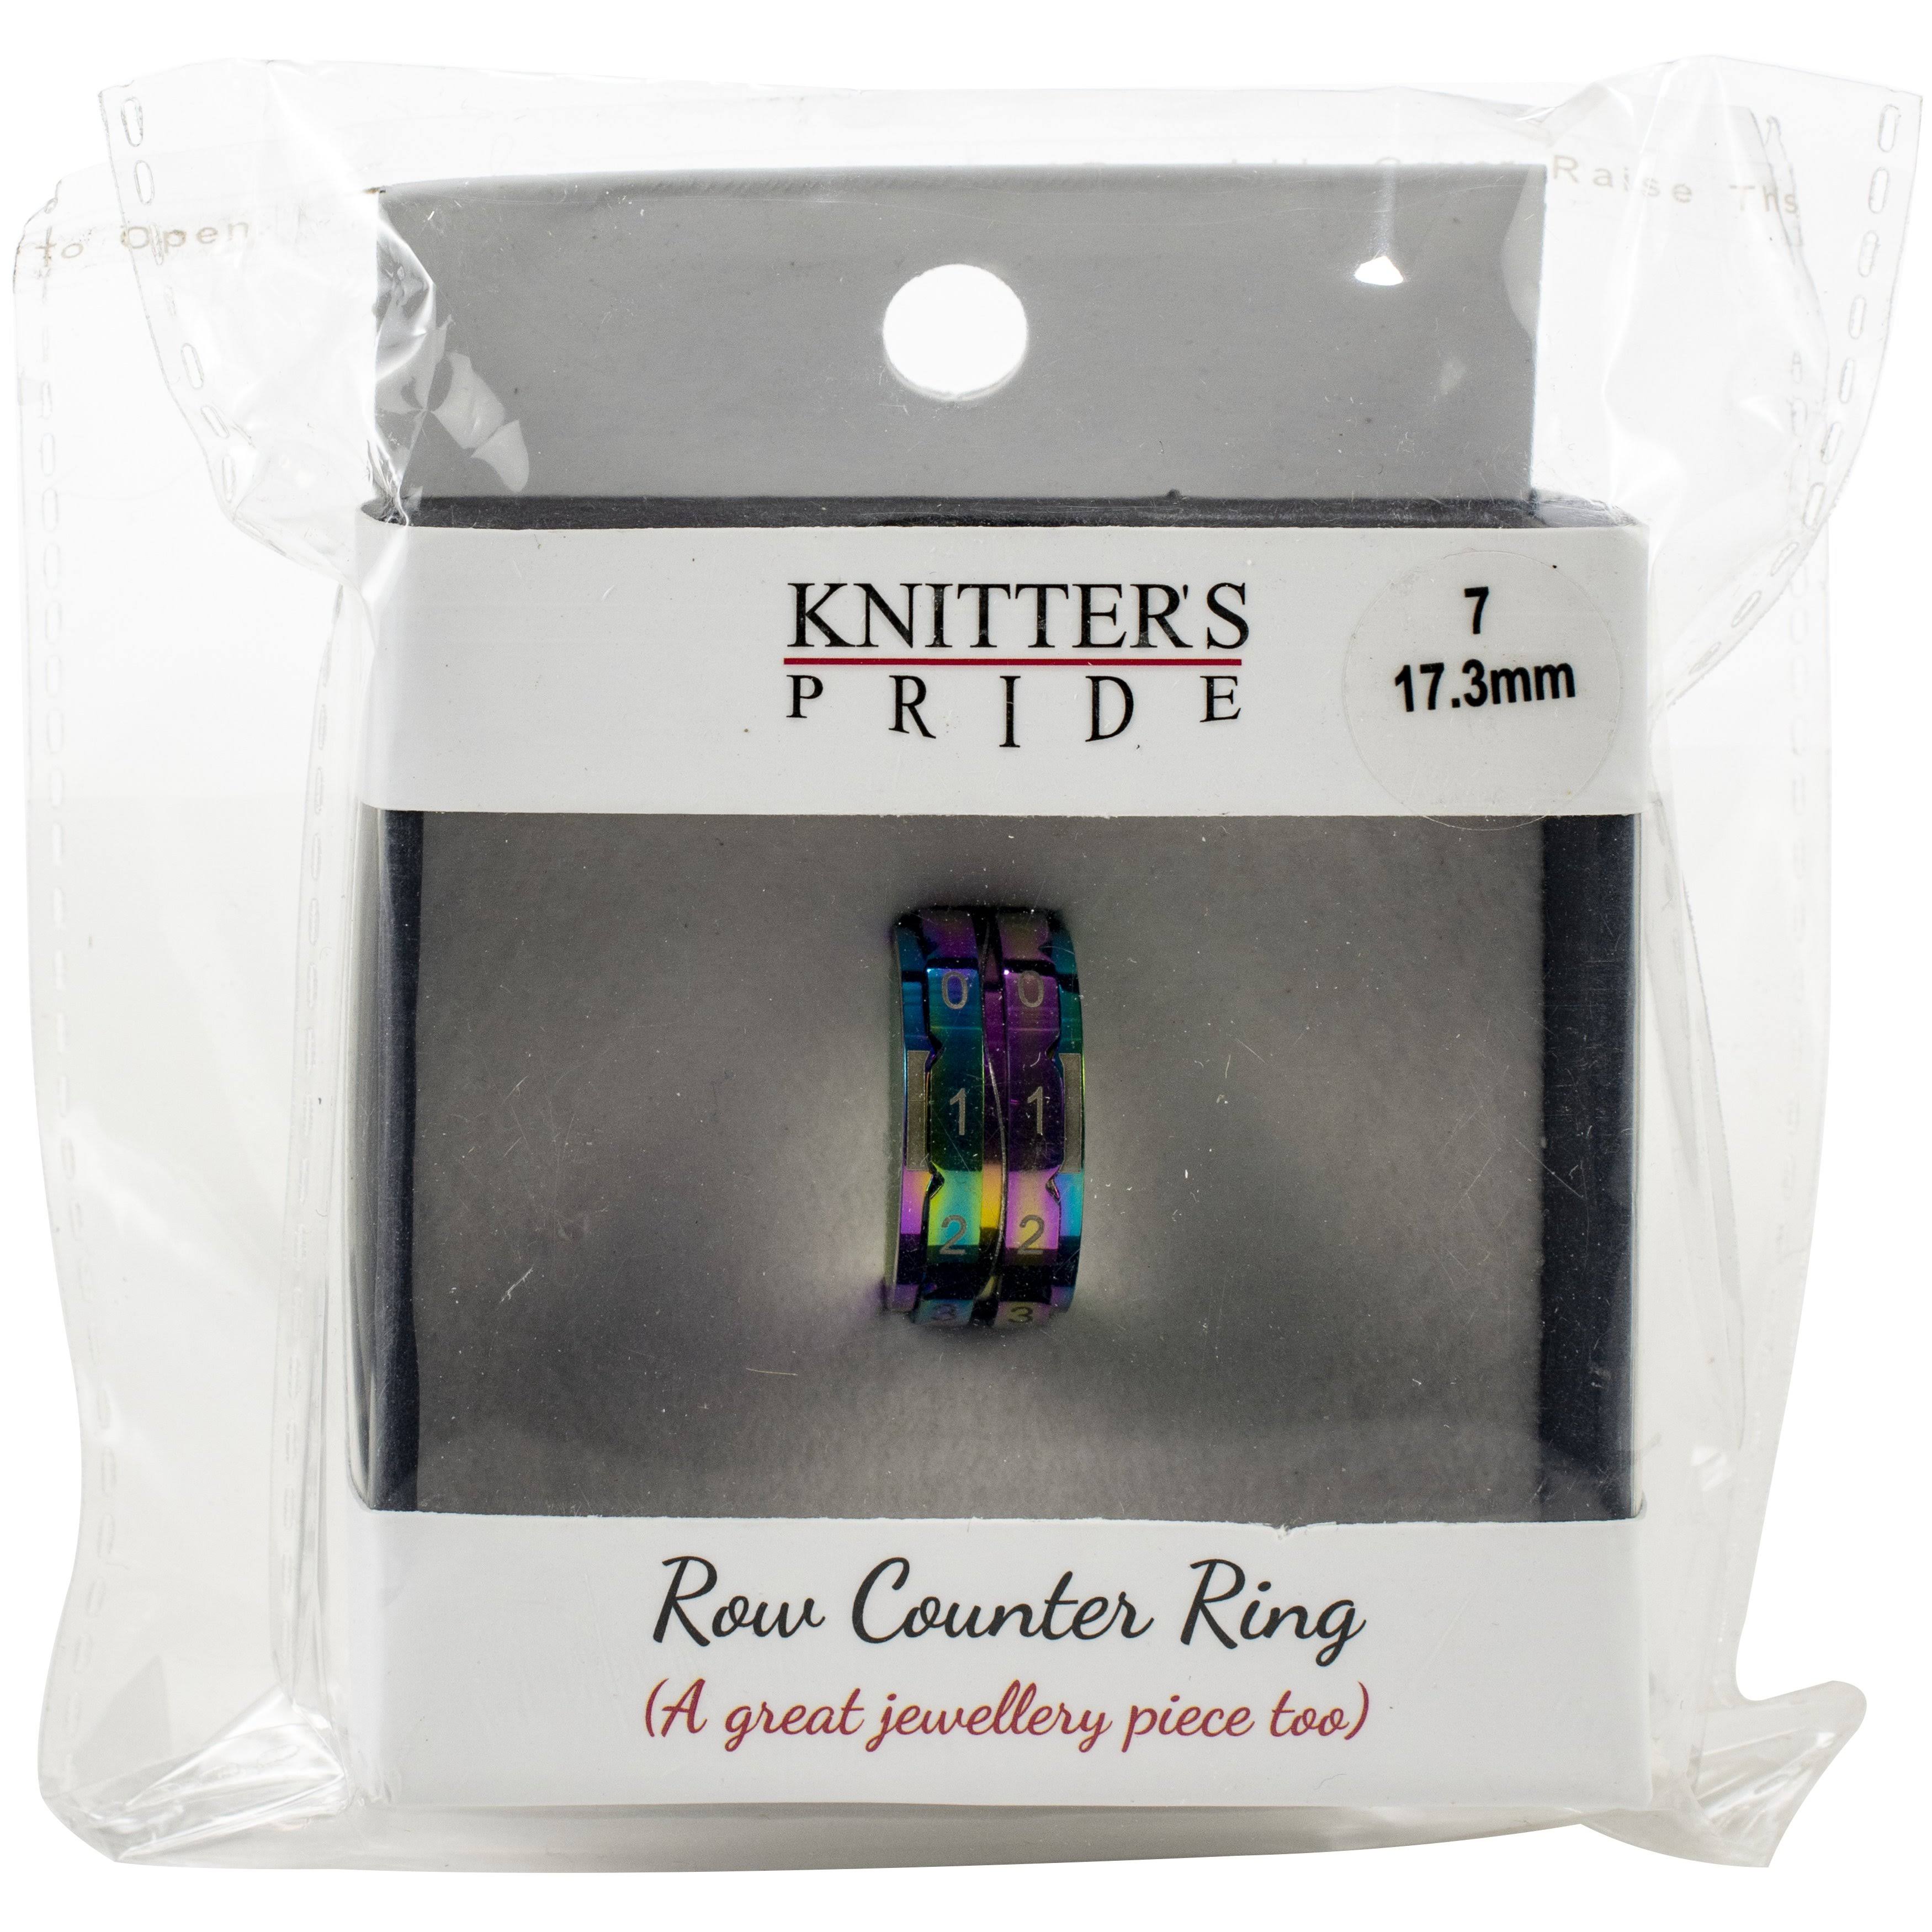 Knitter's Pride Rainbow Row Counter Ring-Size 7: 17.3mm Diameter